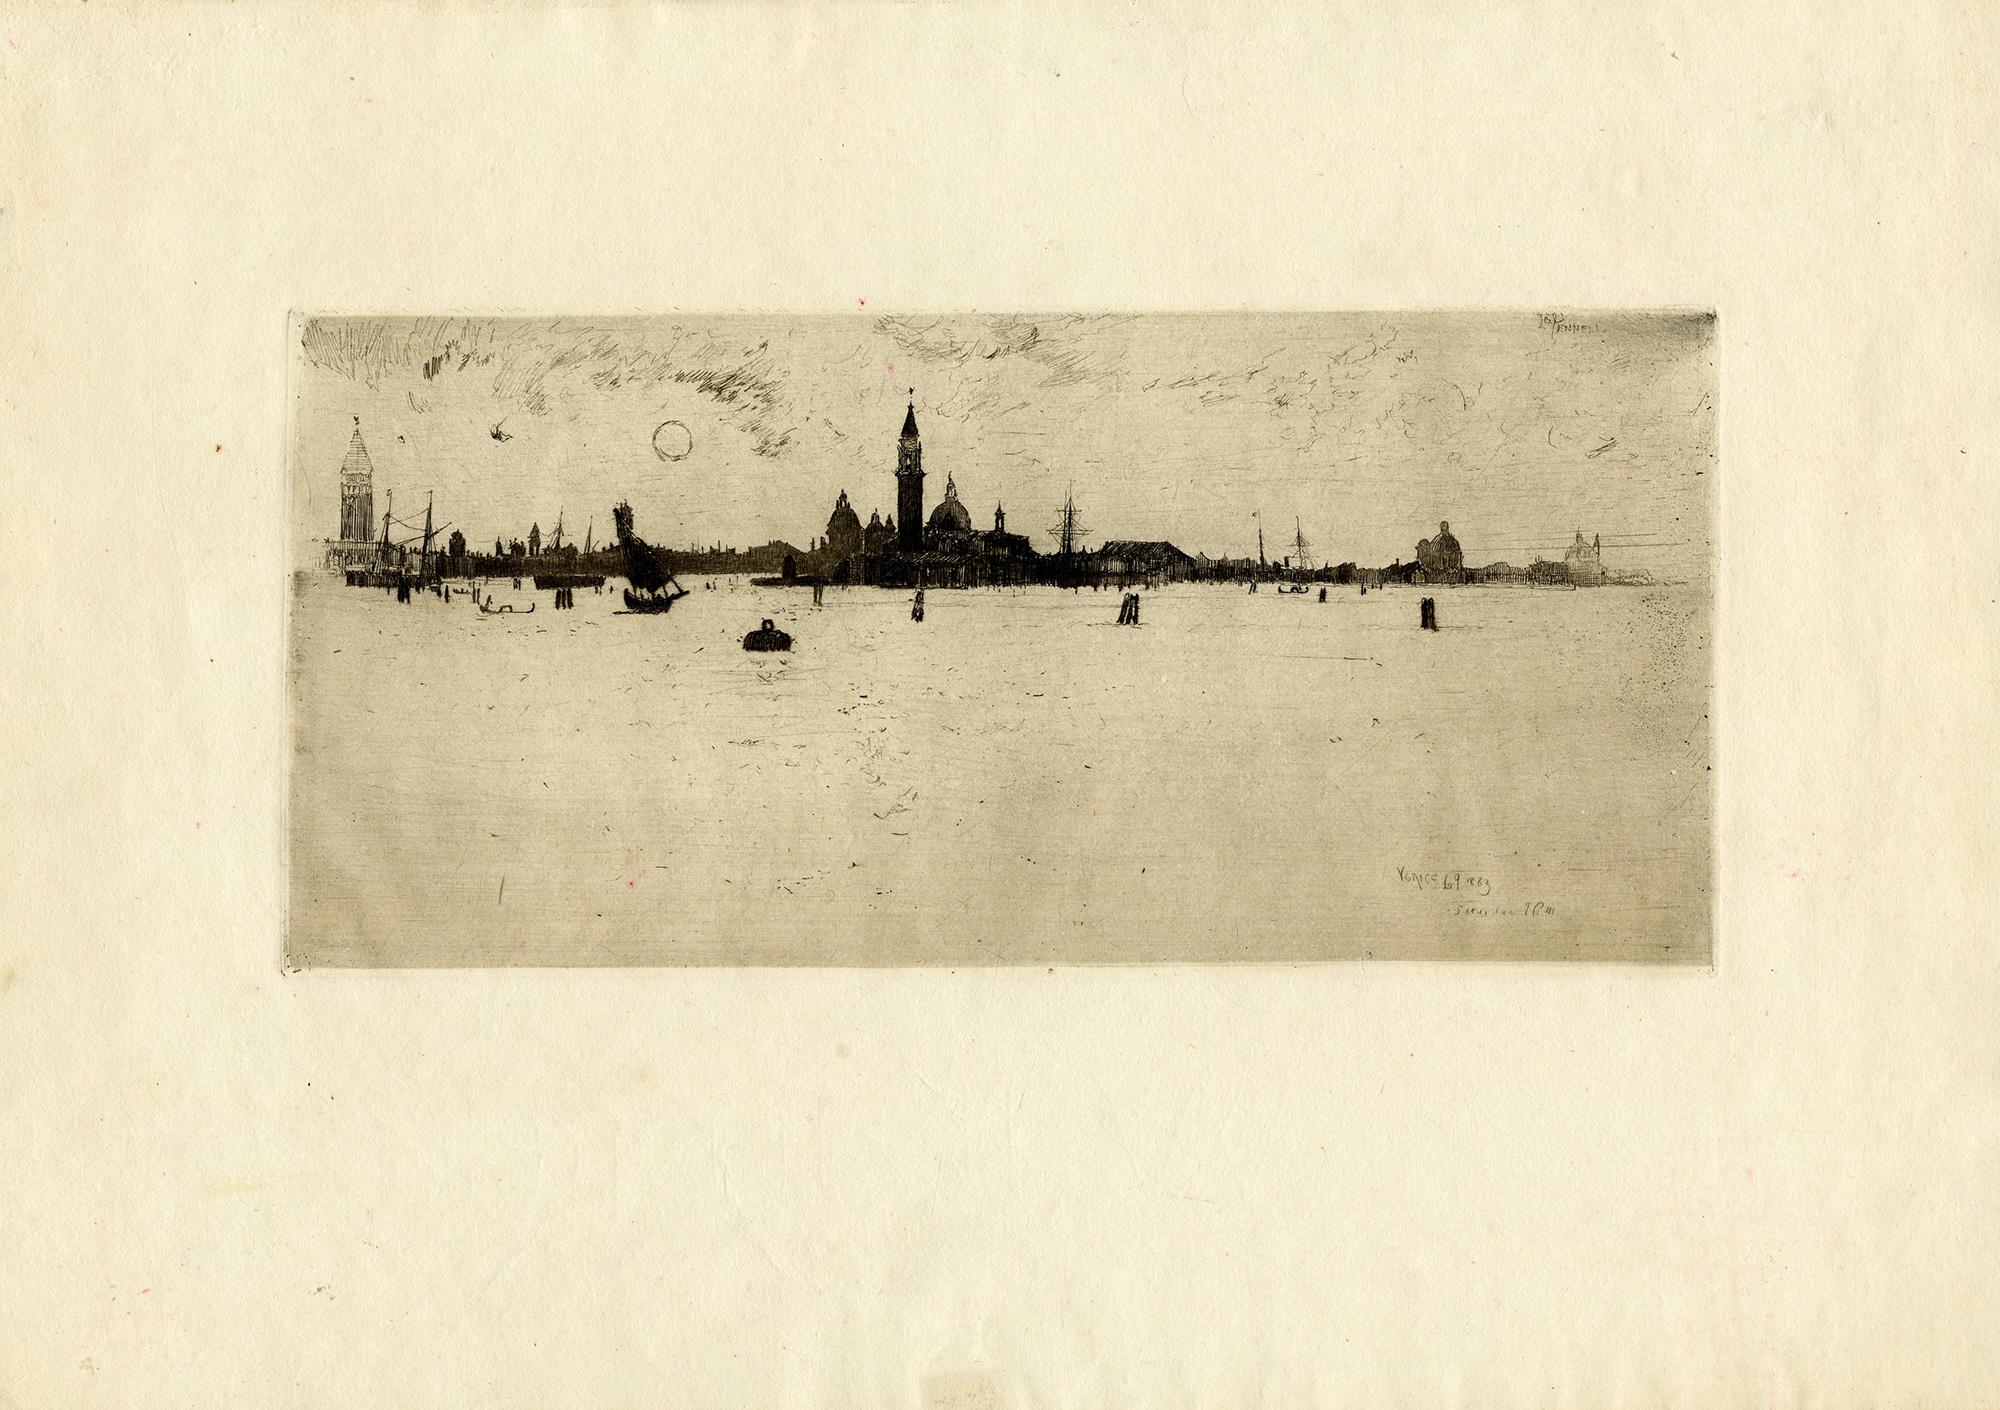 Venice from the Sea - Print by Joseph Pennell